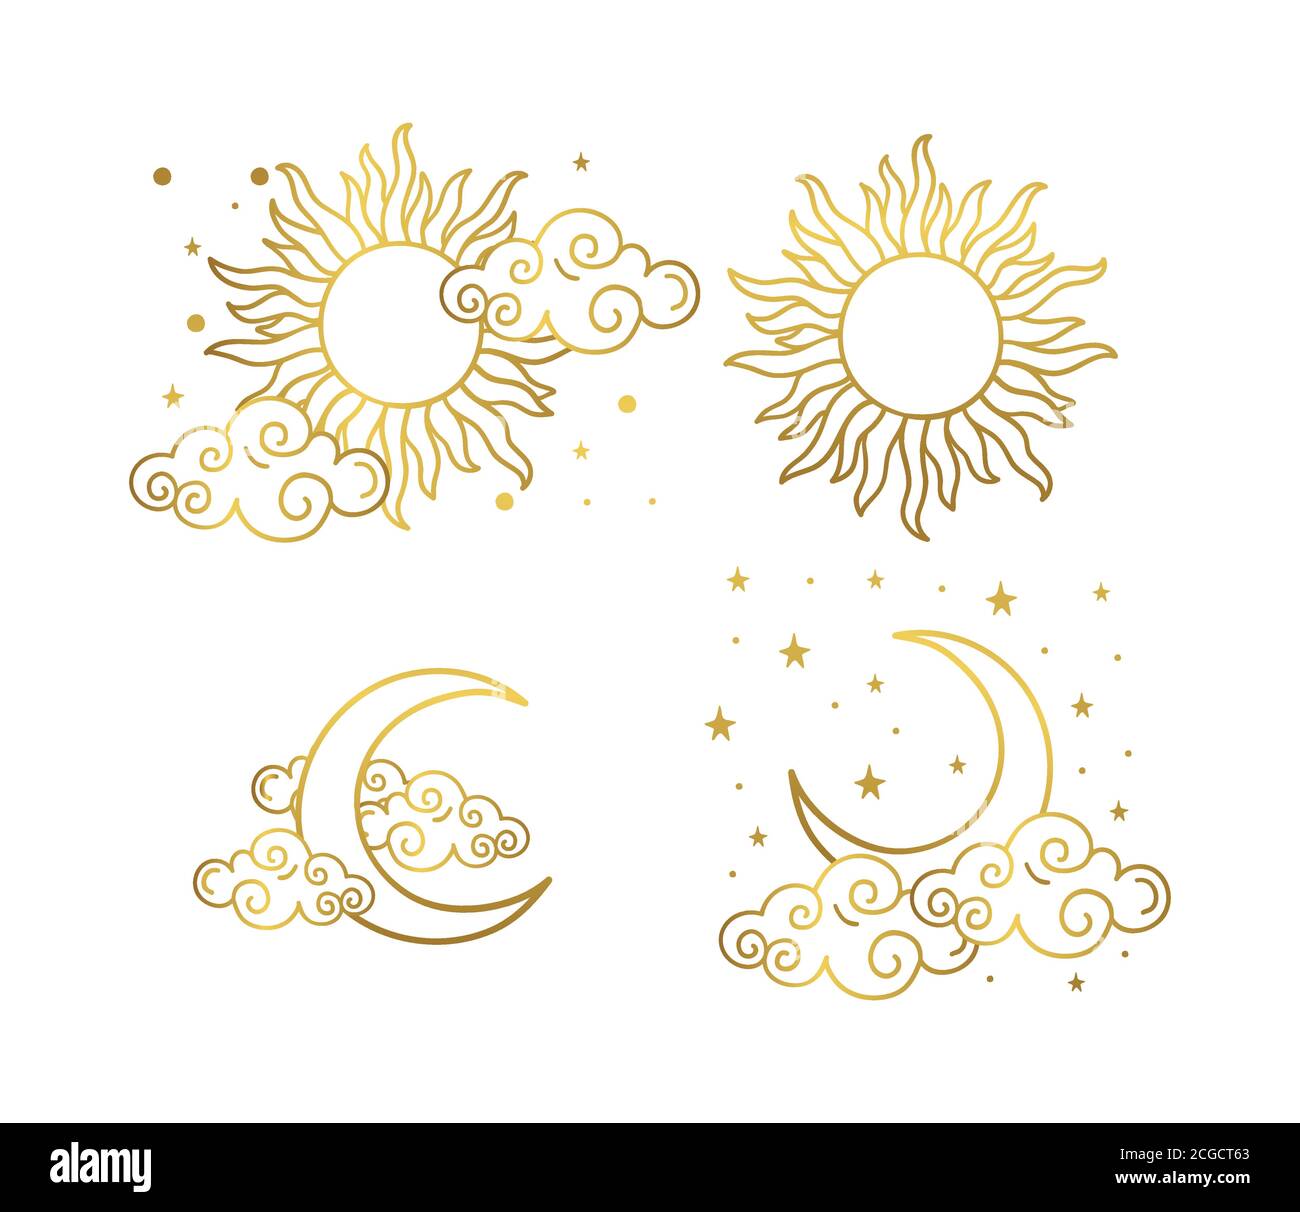 Mystical golden boho tattoos with sun, crescent, stars and clouds. Linear design, hand-drawing. Set of elements for astrology, mysticism and fortune telling. Vector illustration on a white background. Stock Vector